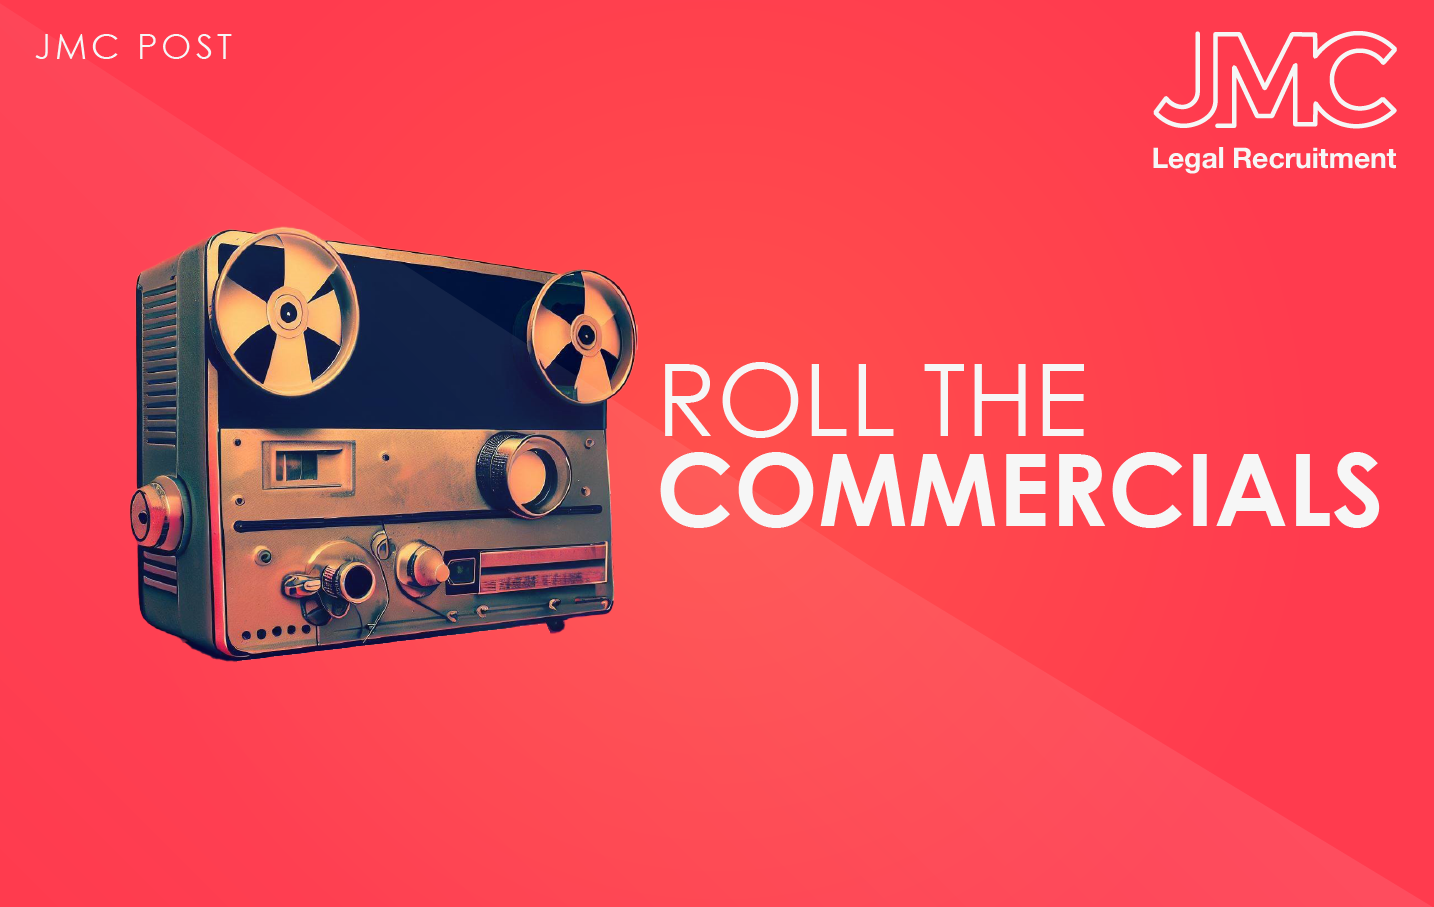 Roll the commercials!